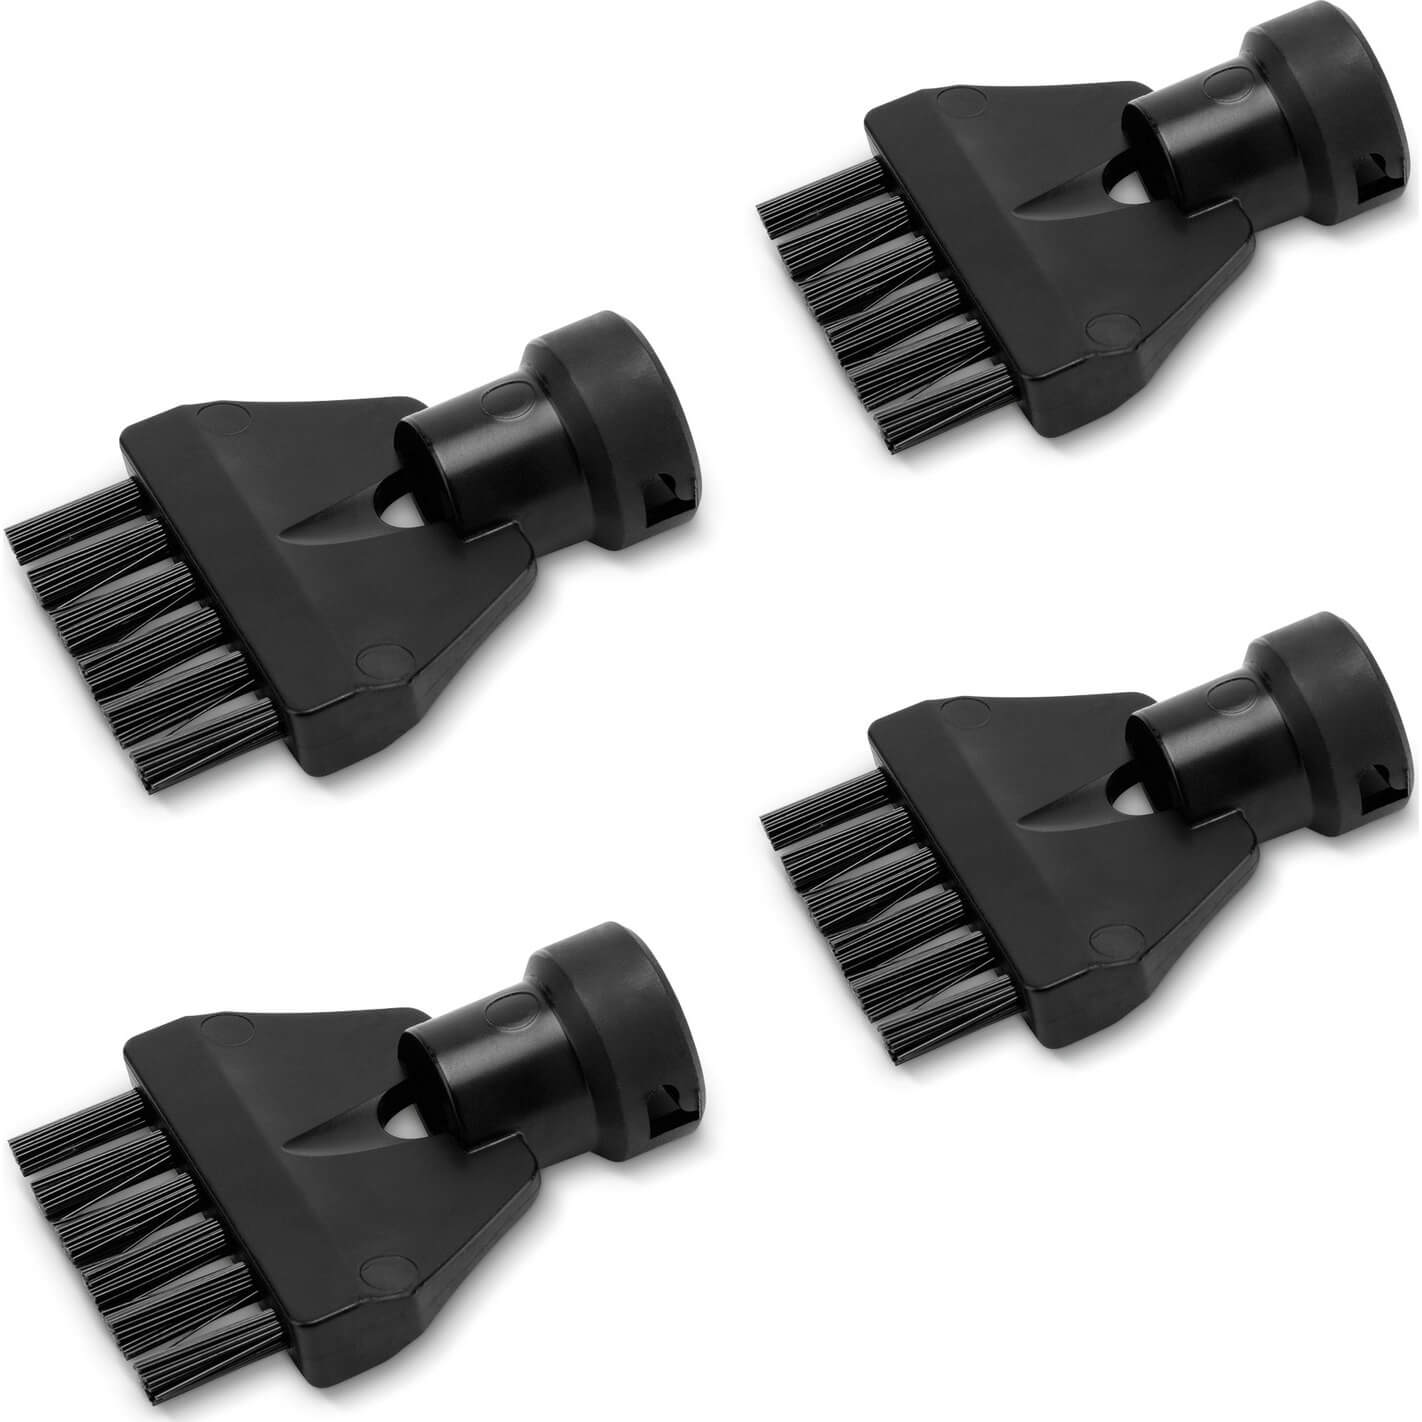 Karcher 4 Piece Crevice Brush Nozzle Set for SC Steam Cleaners